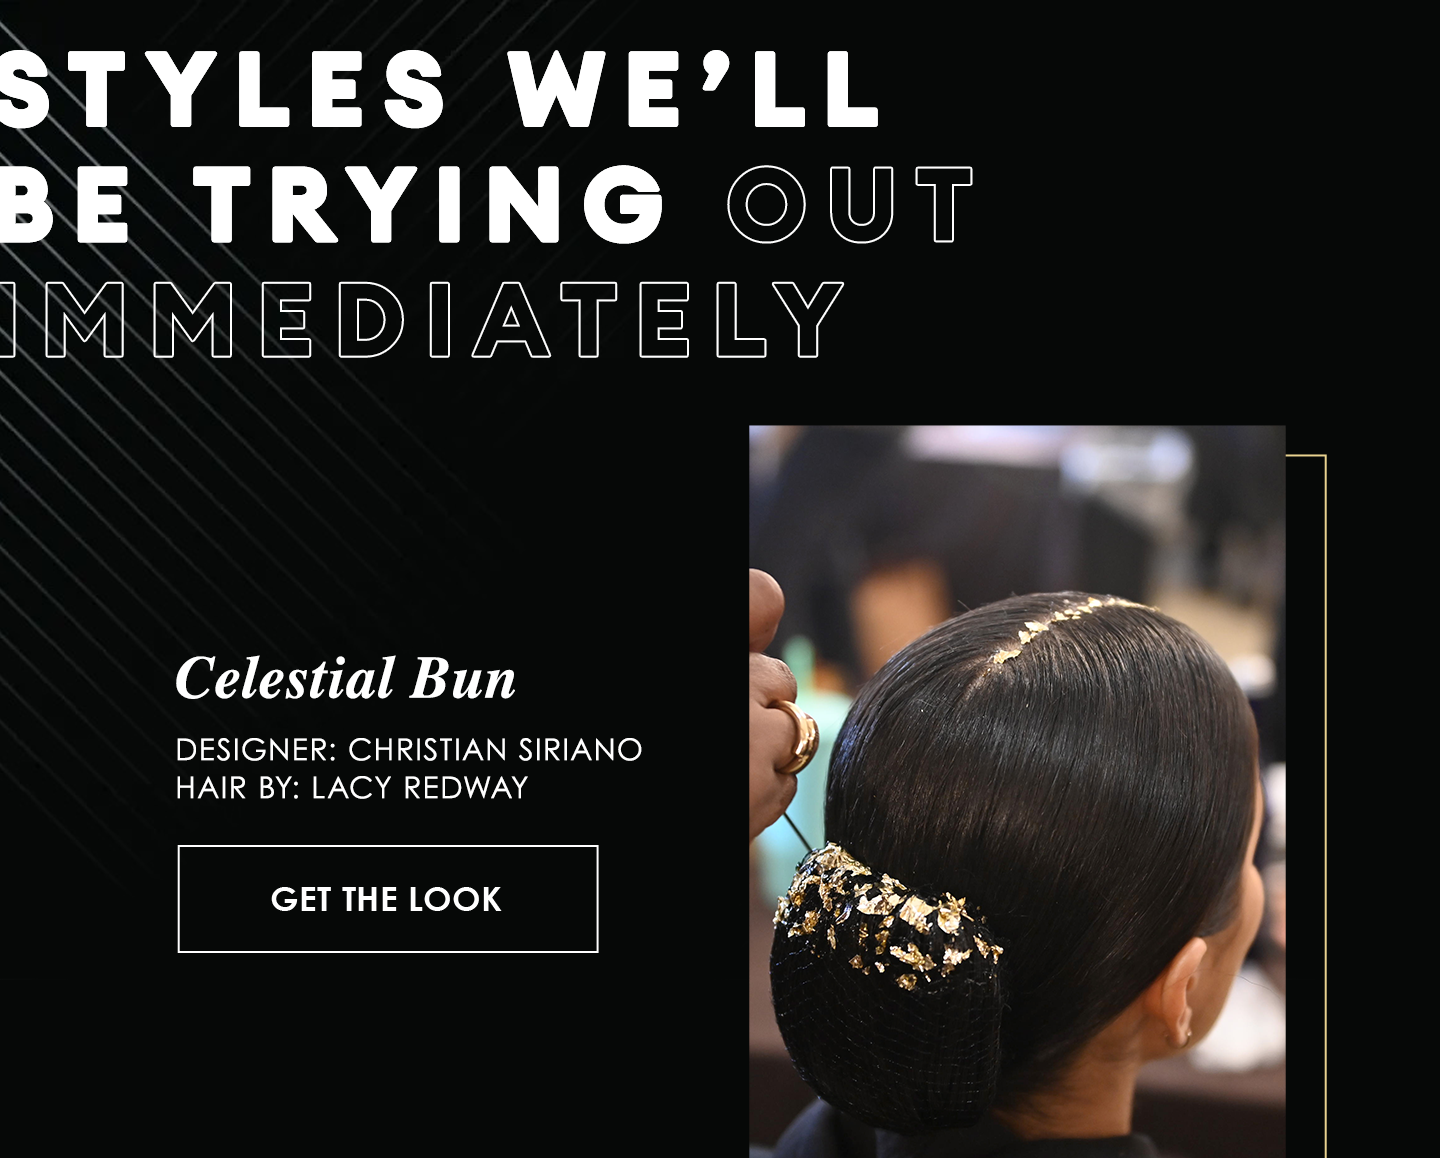 Styles well
be trying out
immediately | Celestial Bun
Designer: Christian Siriano
Hair By: Lacy Redway | Get the Look
